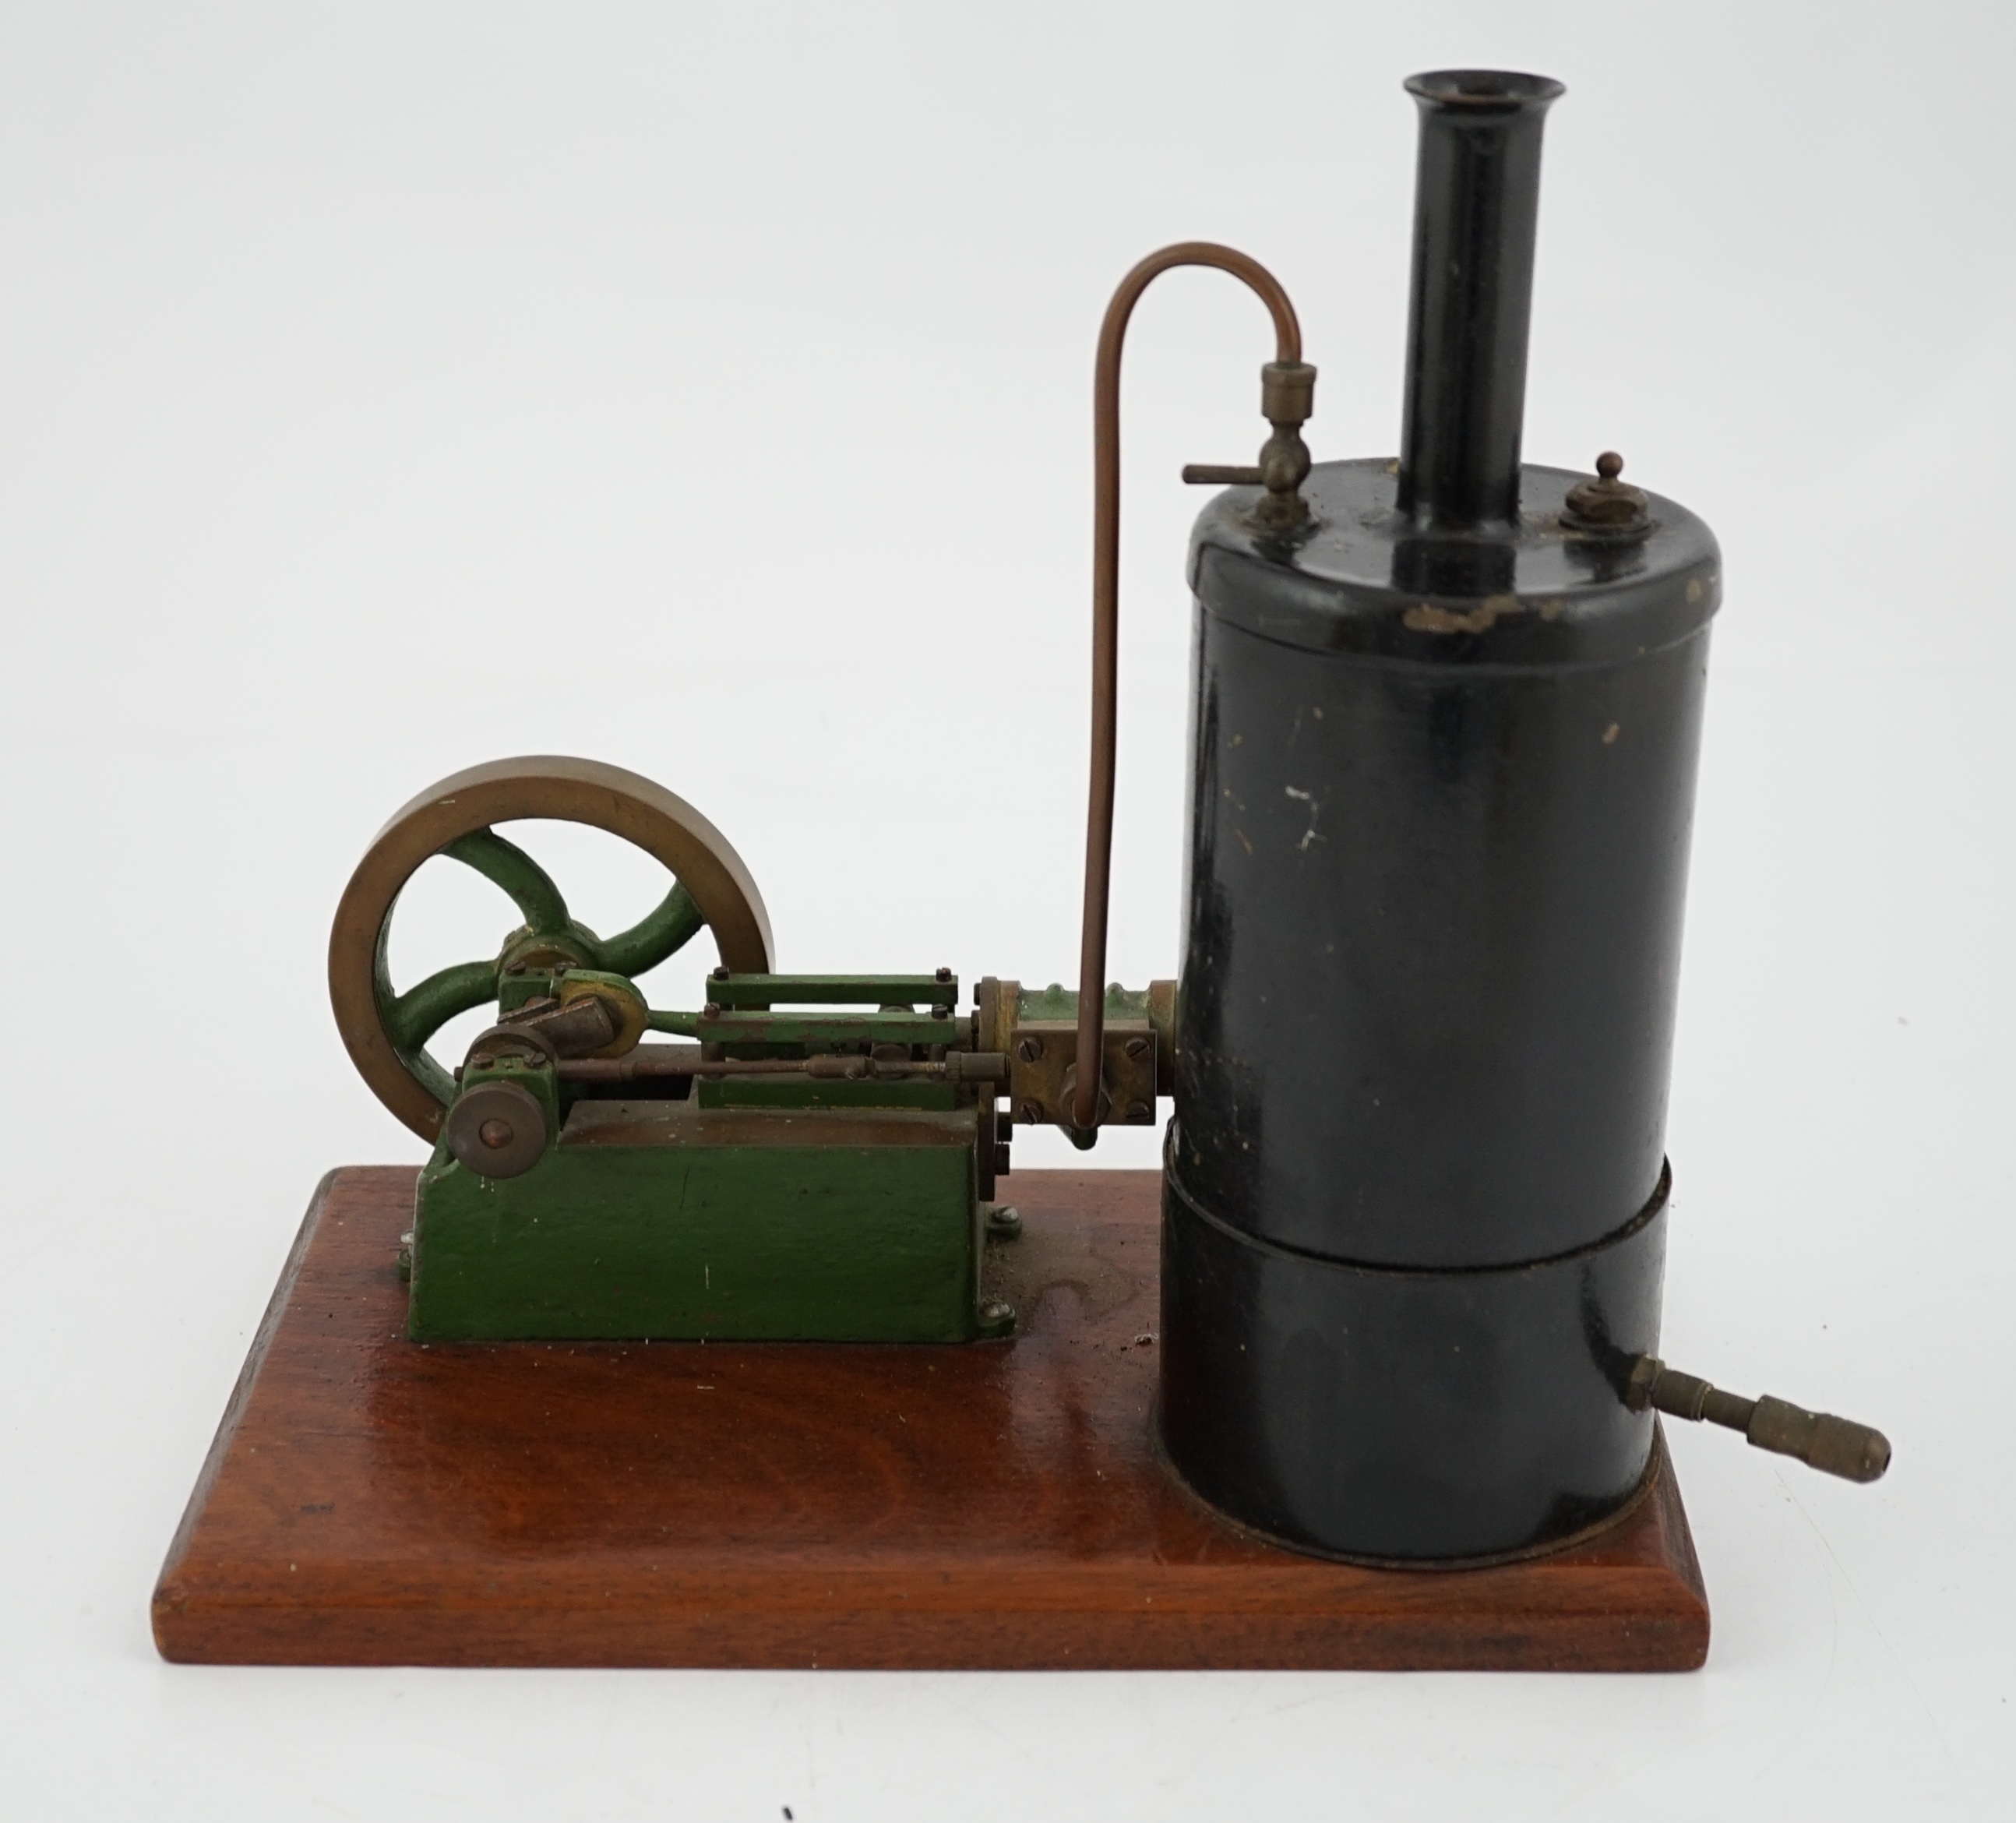 A Stuart Turner style stationary steam plant, with vertical boiler with fittings for a water sight glass and a pressure gauge (both missing), connected to a single cylinder horizontal steam engine with slide valve, mount